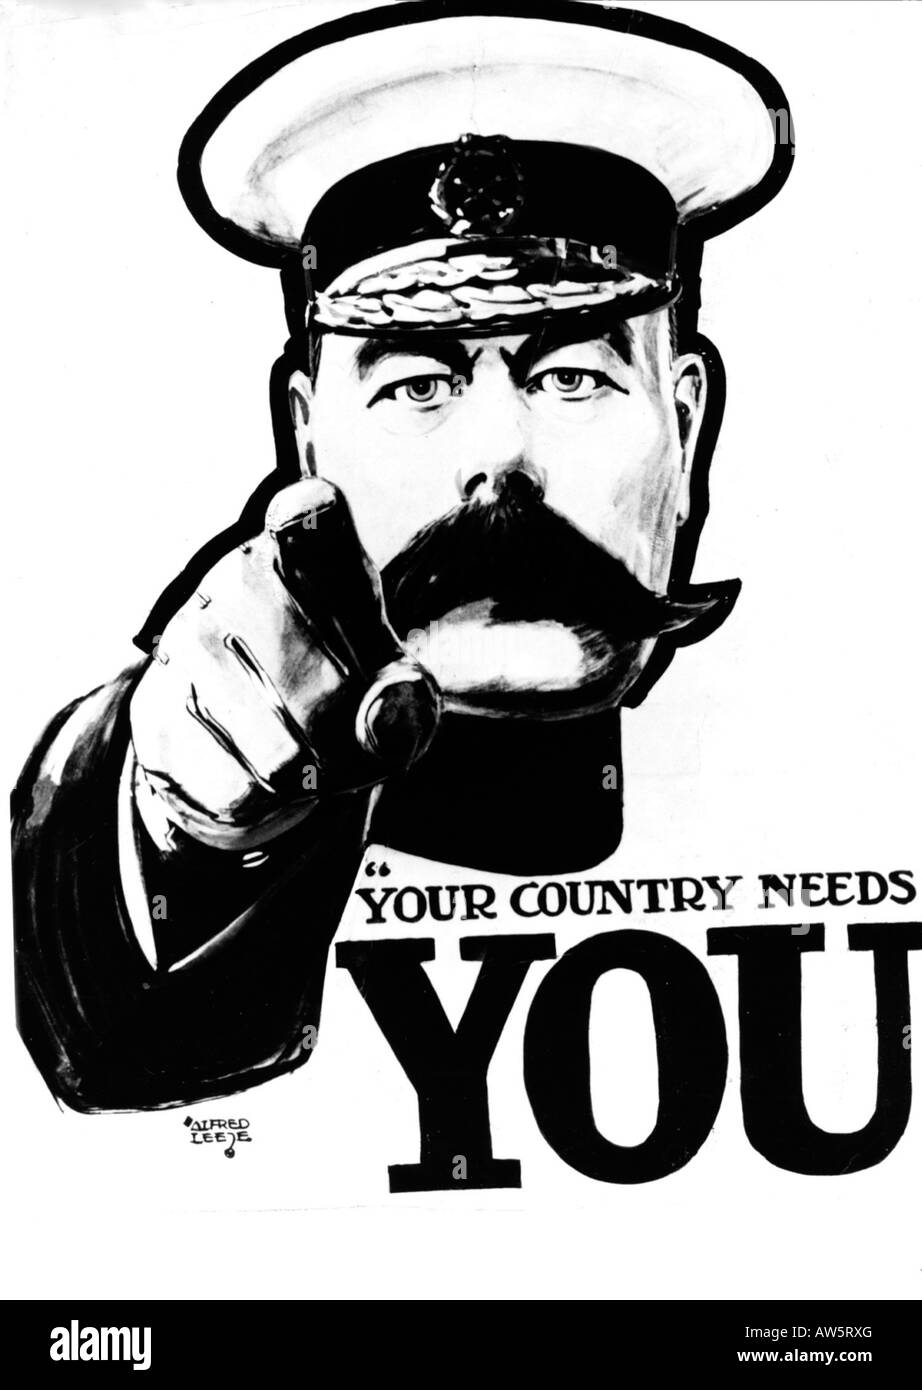 clip art your country needs you - photo #39